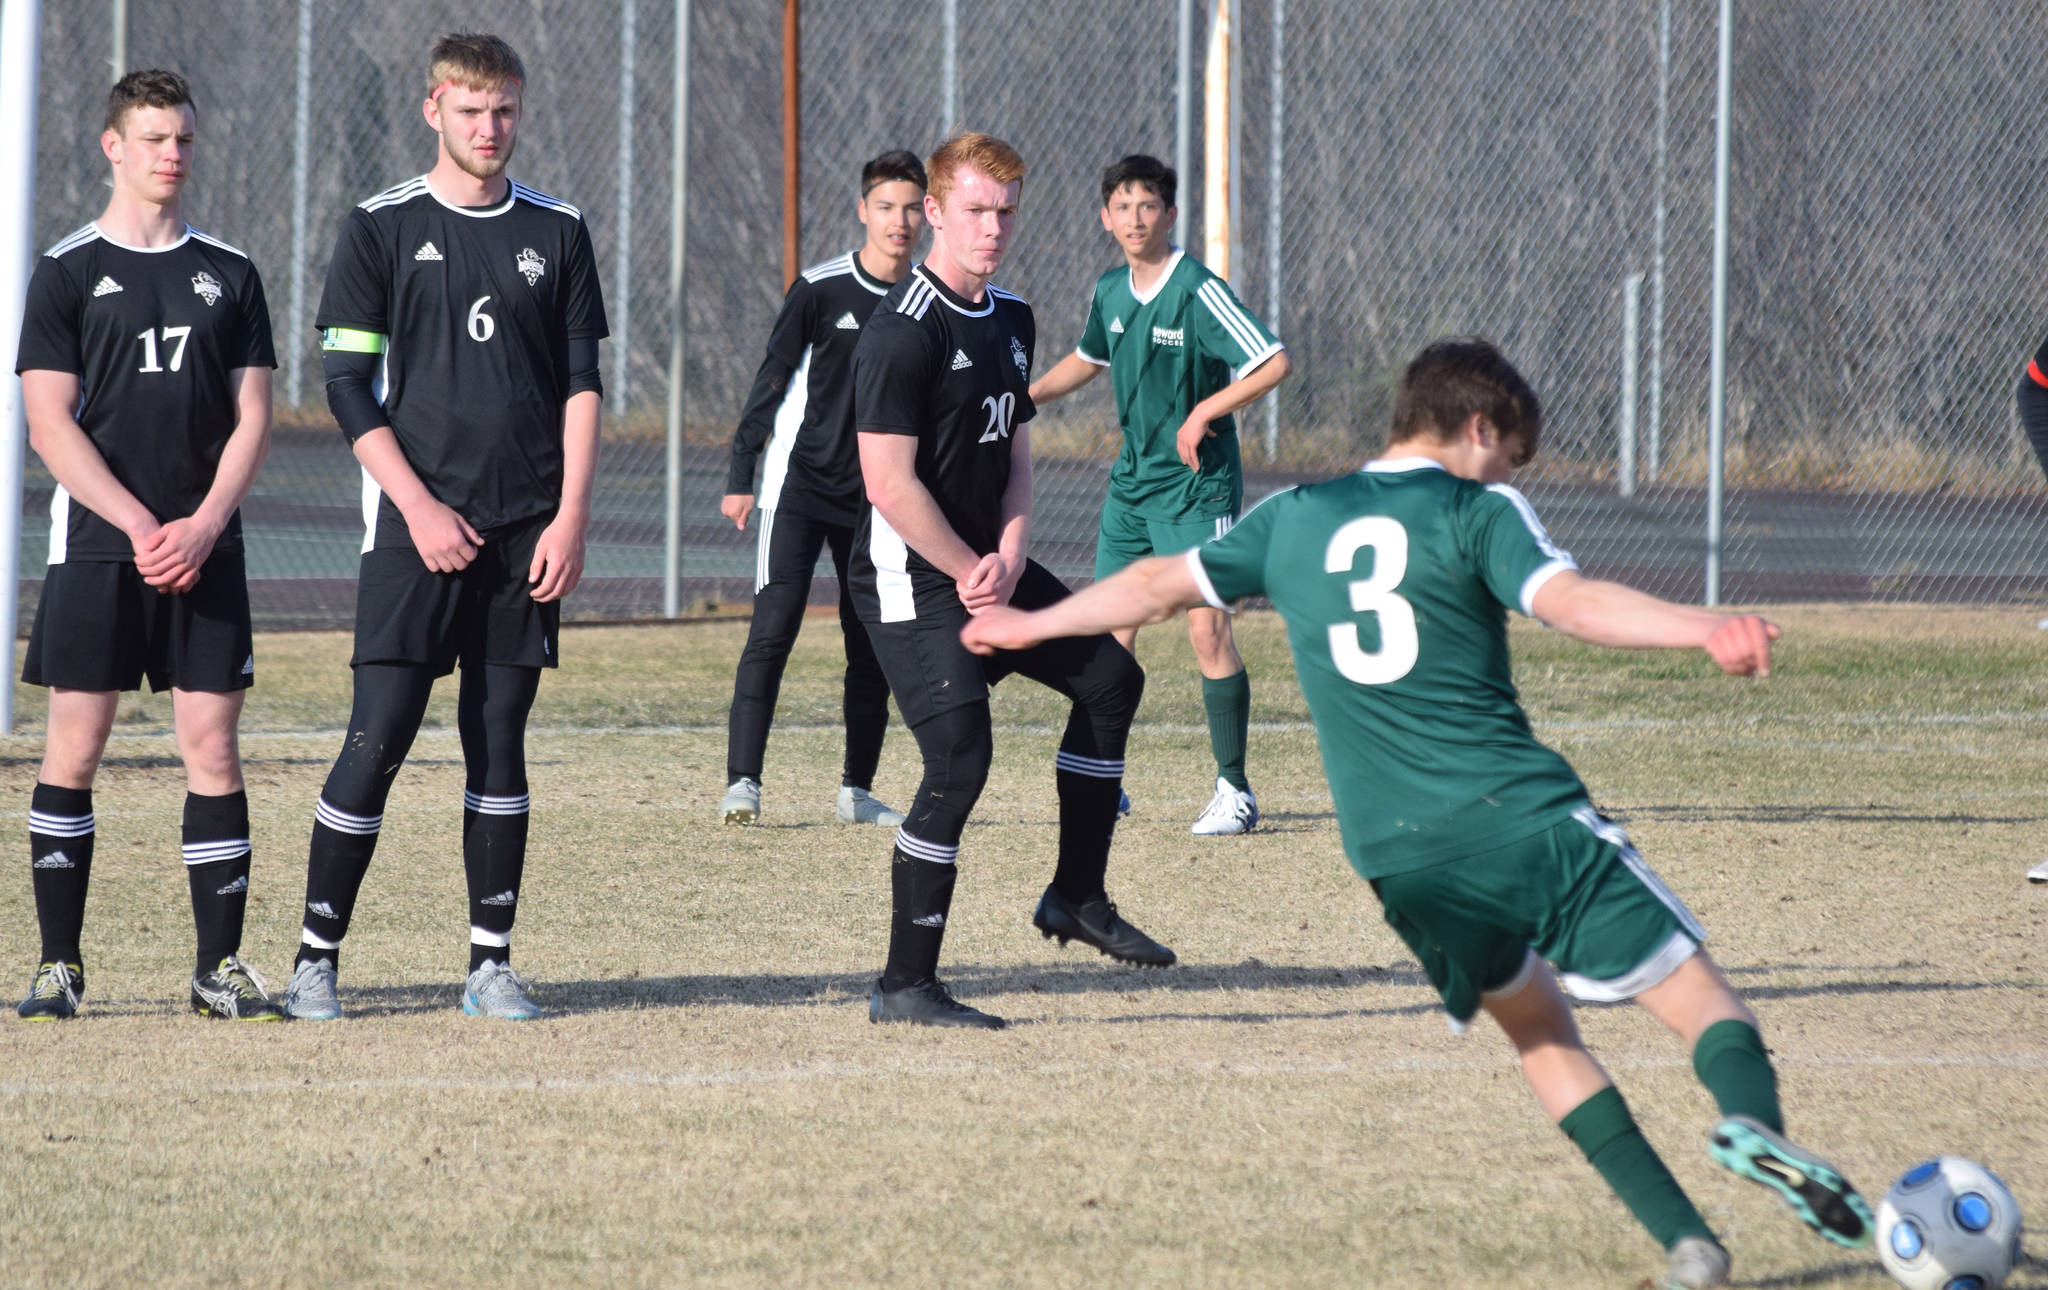 Seward’s Samuel Koster fires a free kick towards a wall of Nikiski defenders (L to R, Koleman McCaughey, Cody Handley and Jace Kornstad) Friday afternoon in a Peninsula Conference contest at Nikiski High School. (Photo by Joey Klecka/Peninsula Clarion)